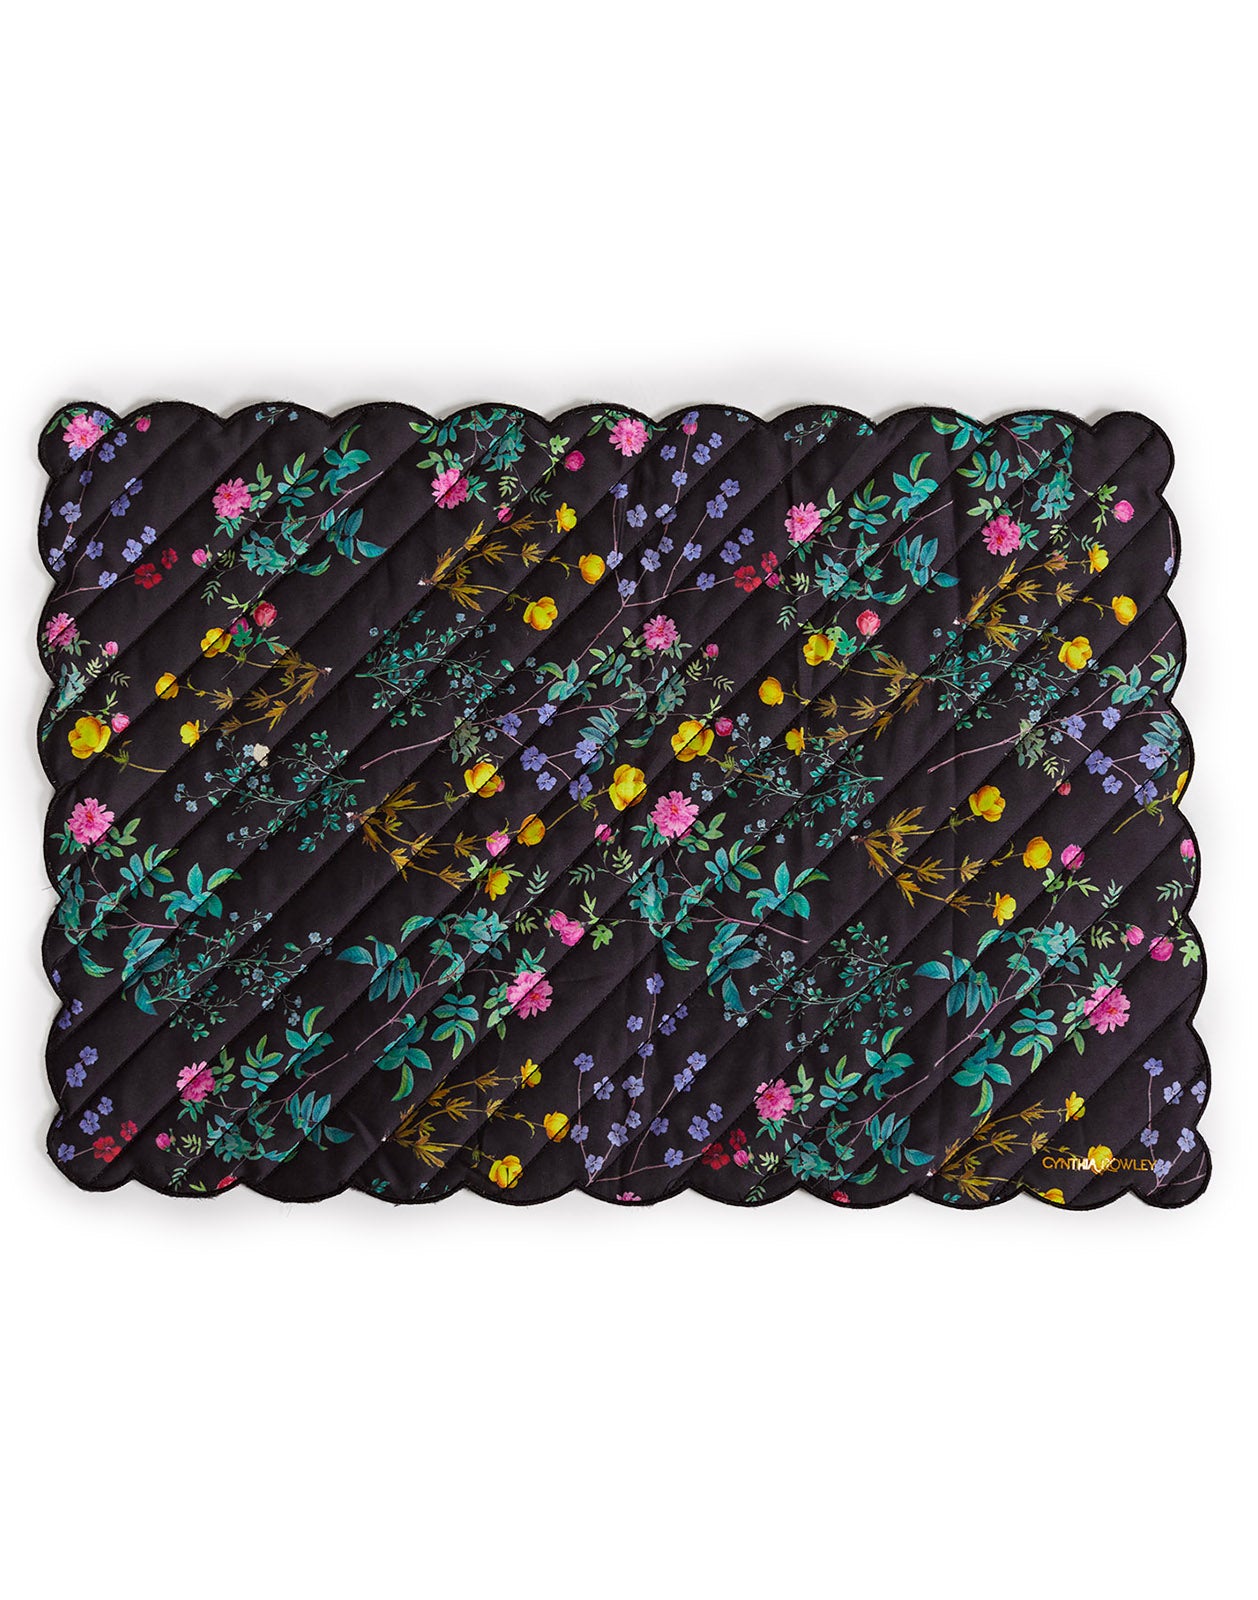 Quilted Cotton Placemat